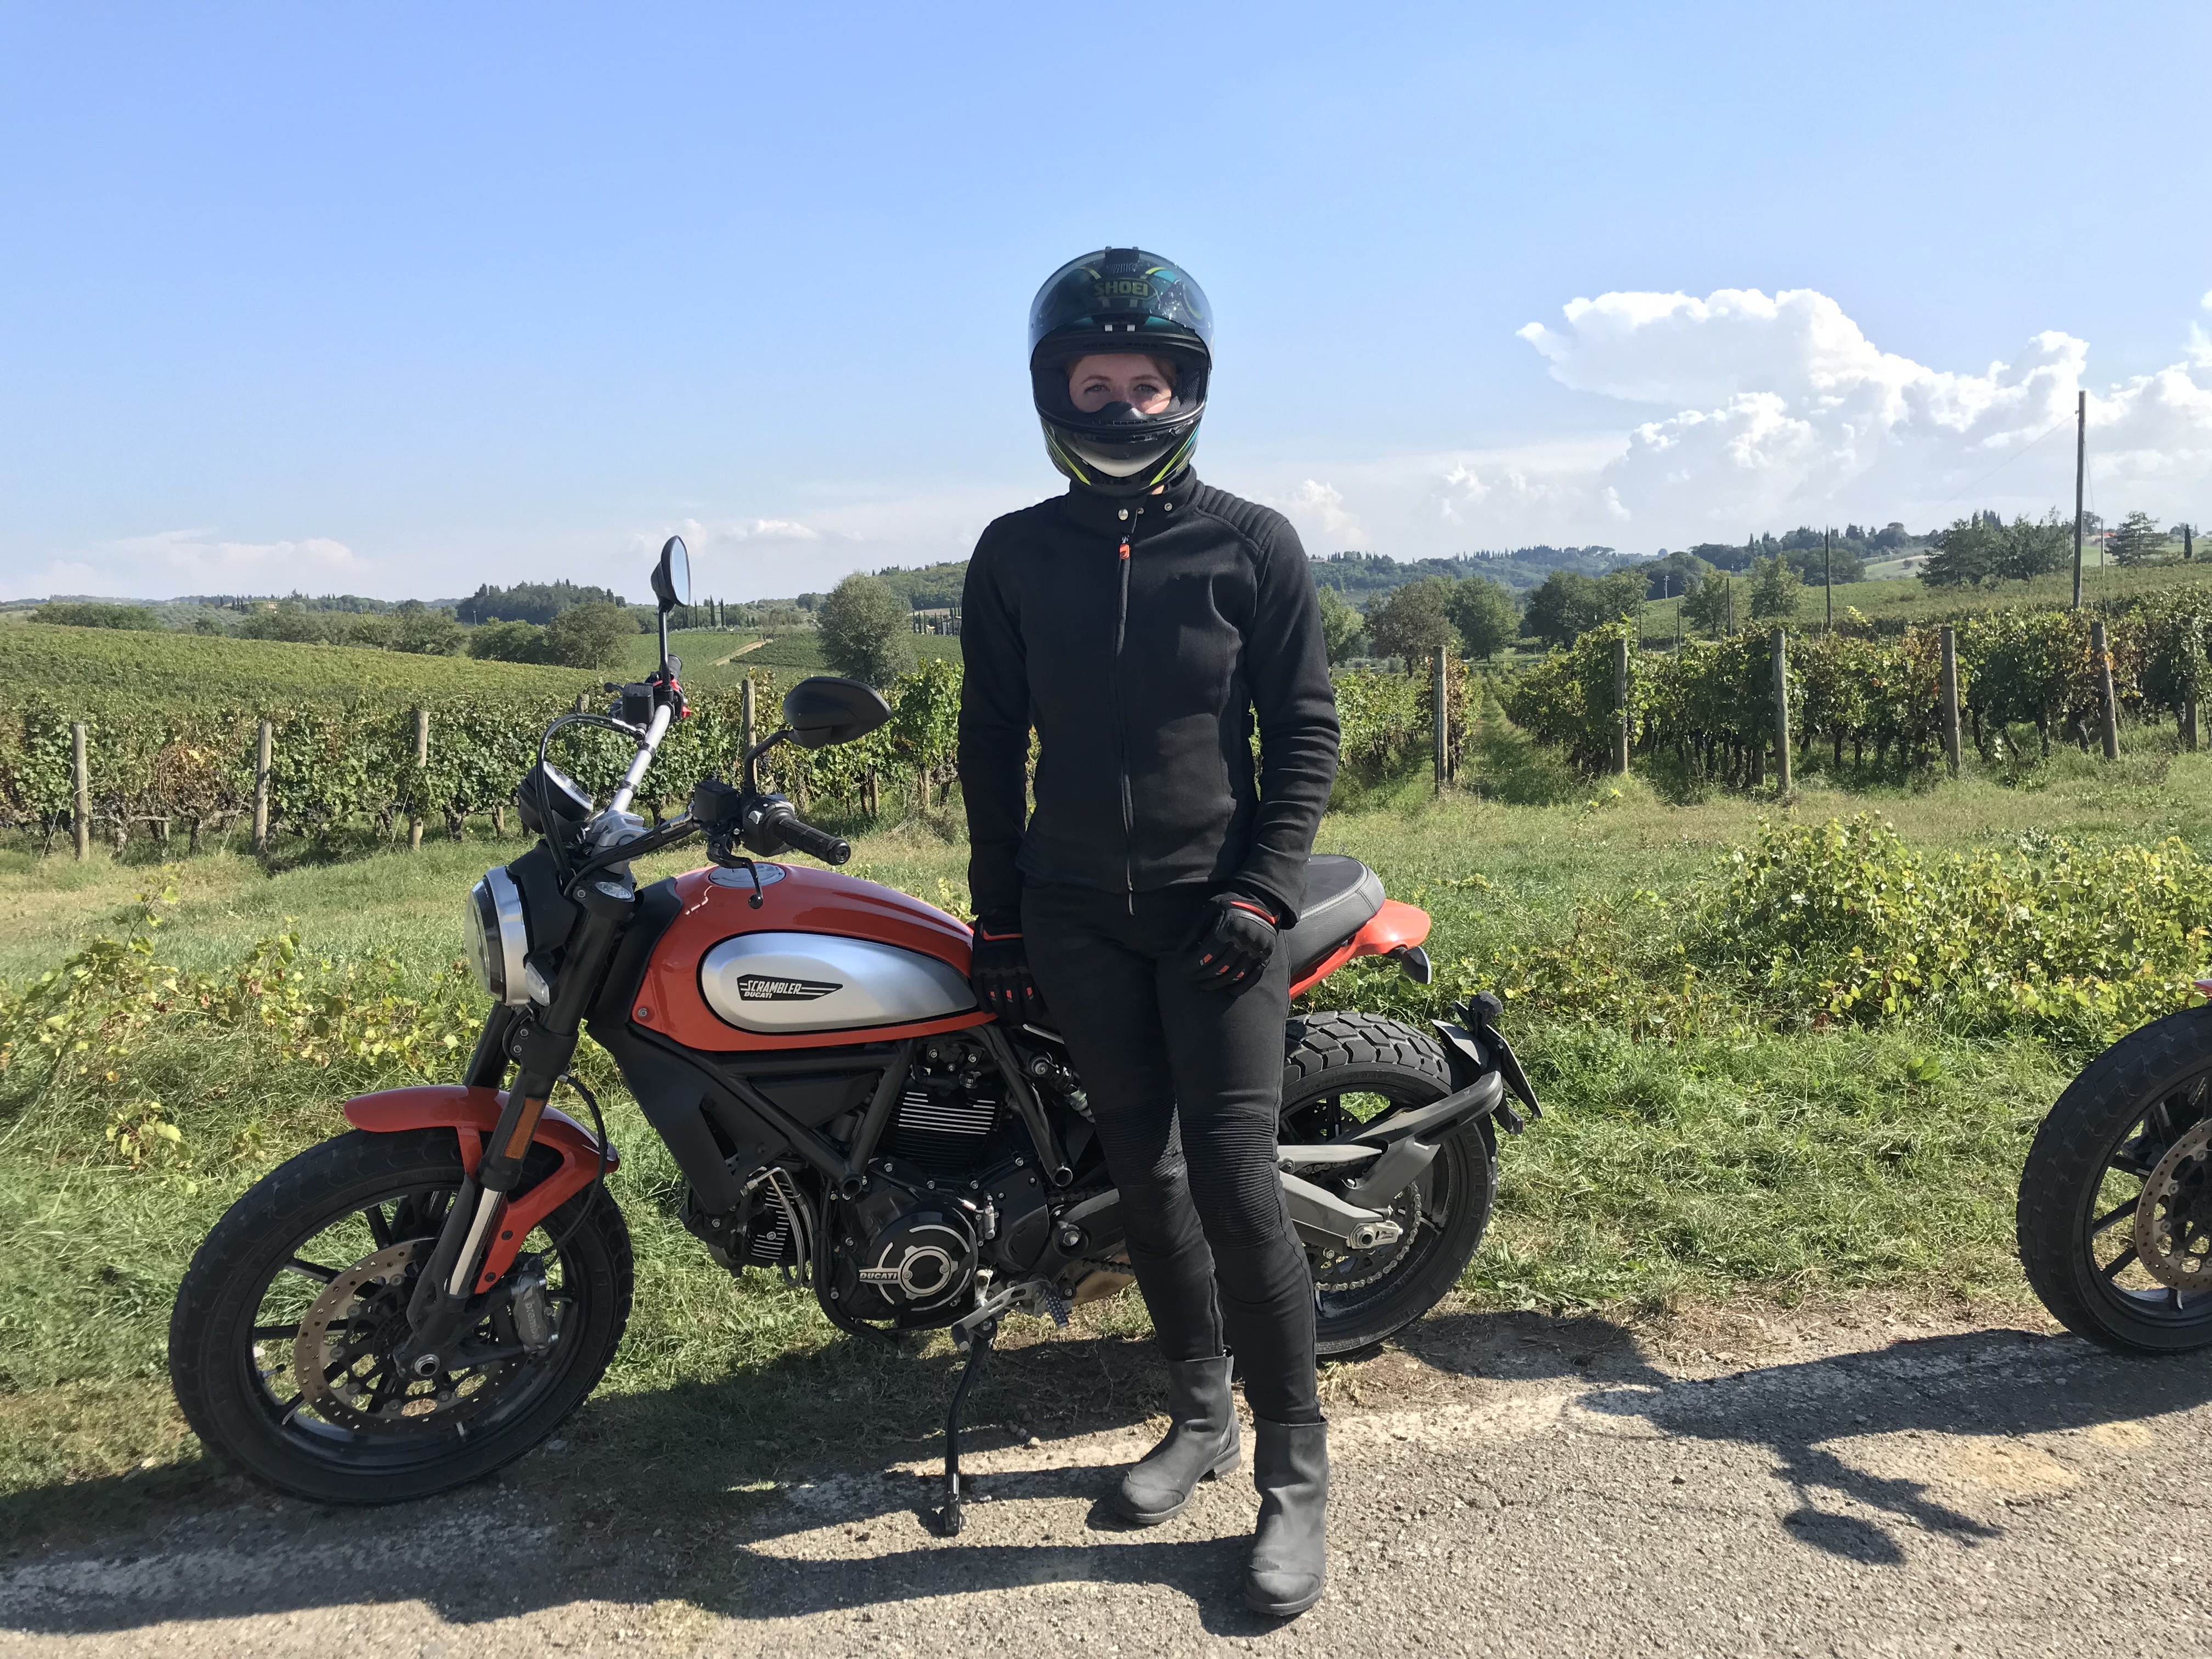 Motogirl Kevlar Leggings Reviewed Articles  International Society of  Precision Agriculture